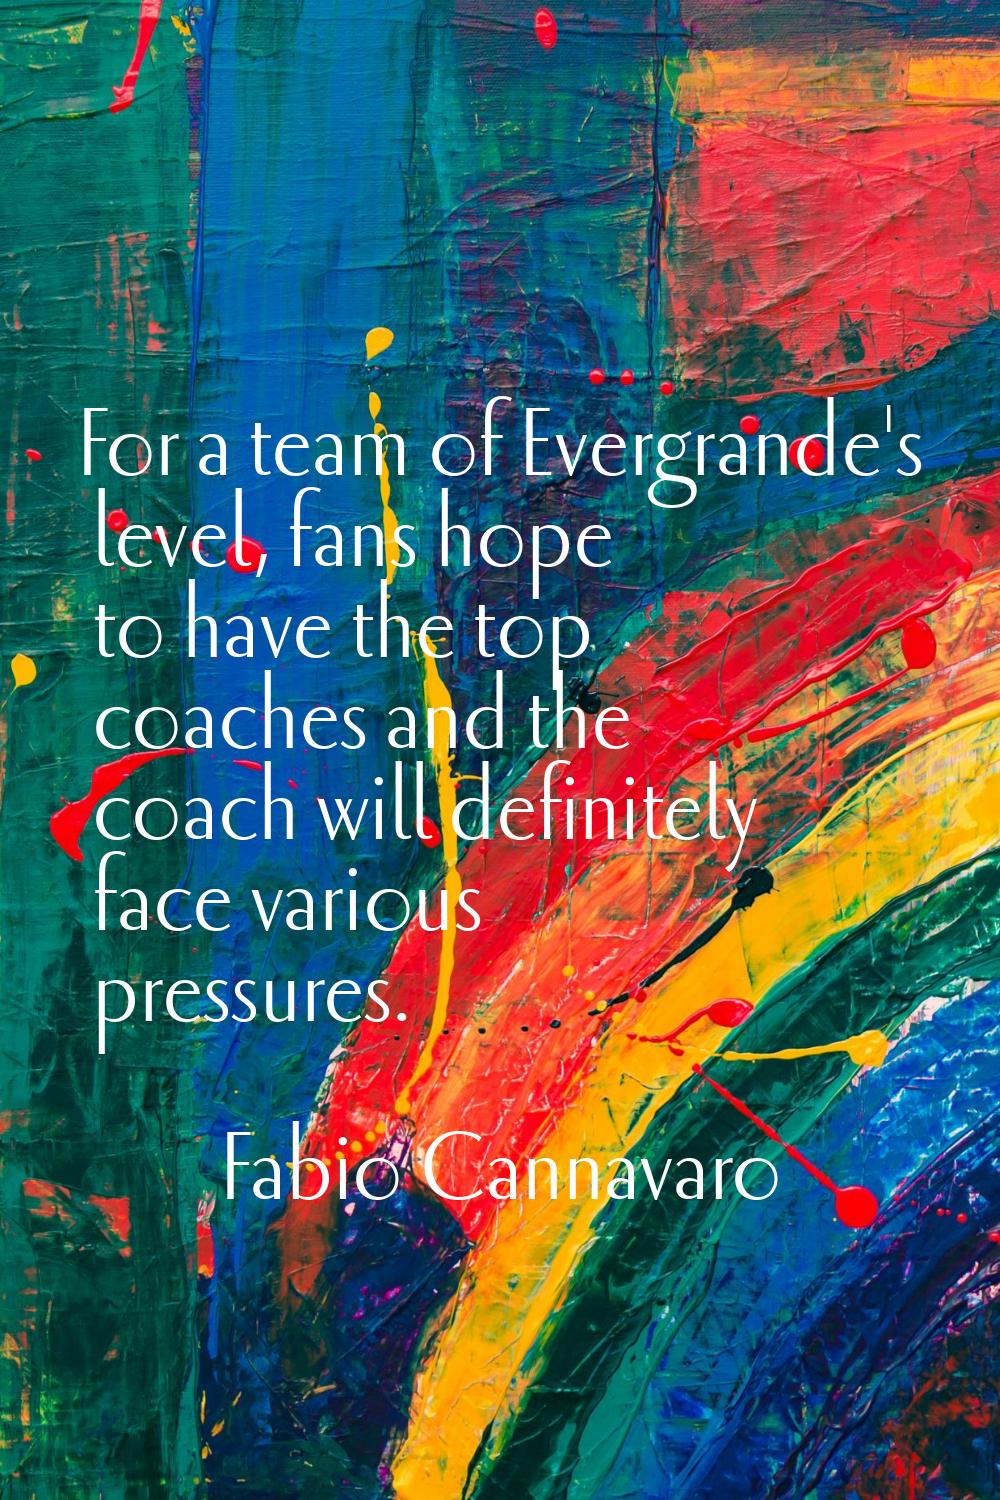 For a team of Evergrande's level, fans hope to have the top coaches and the coach will definitely f